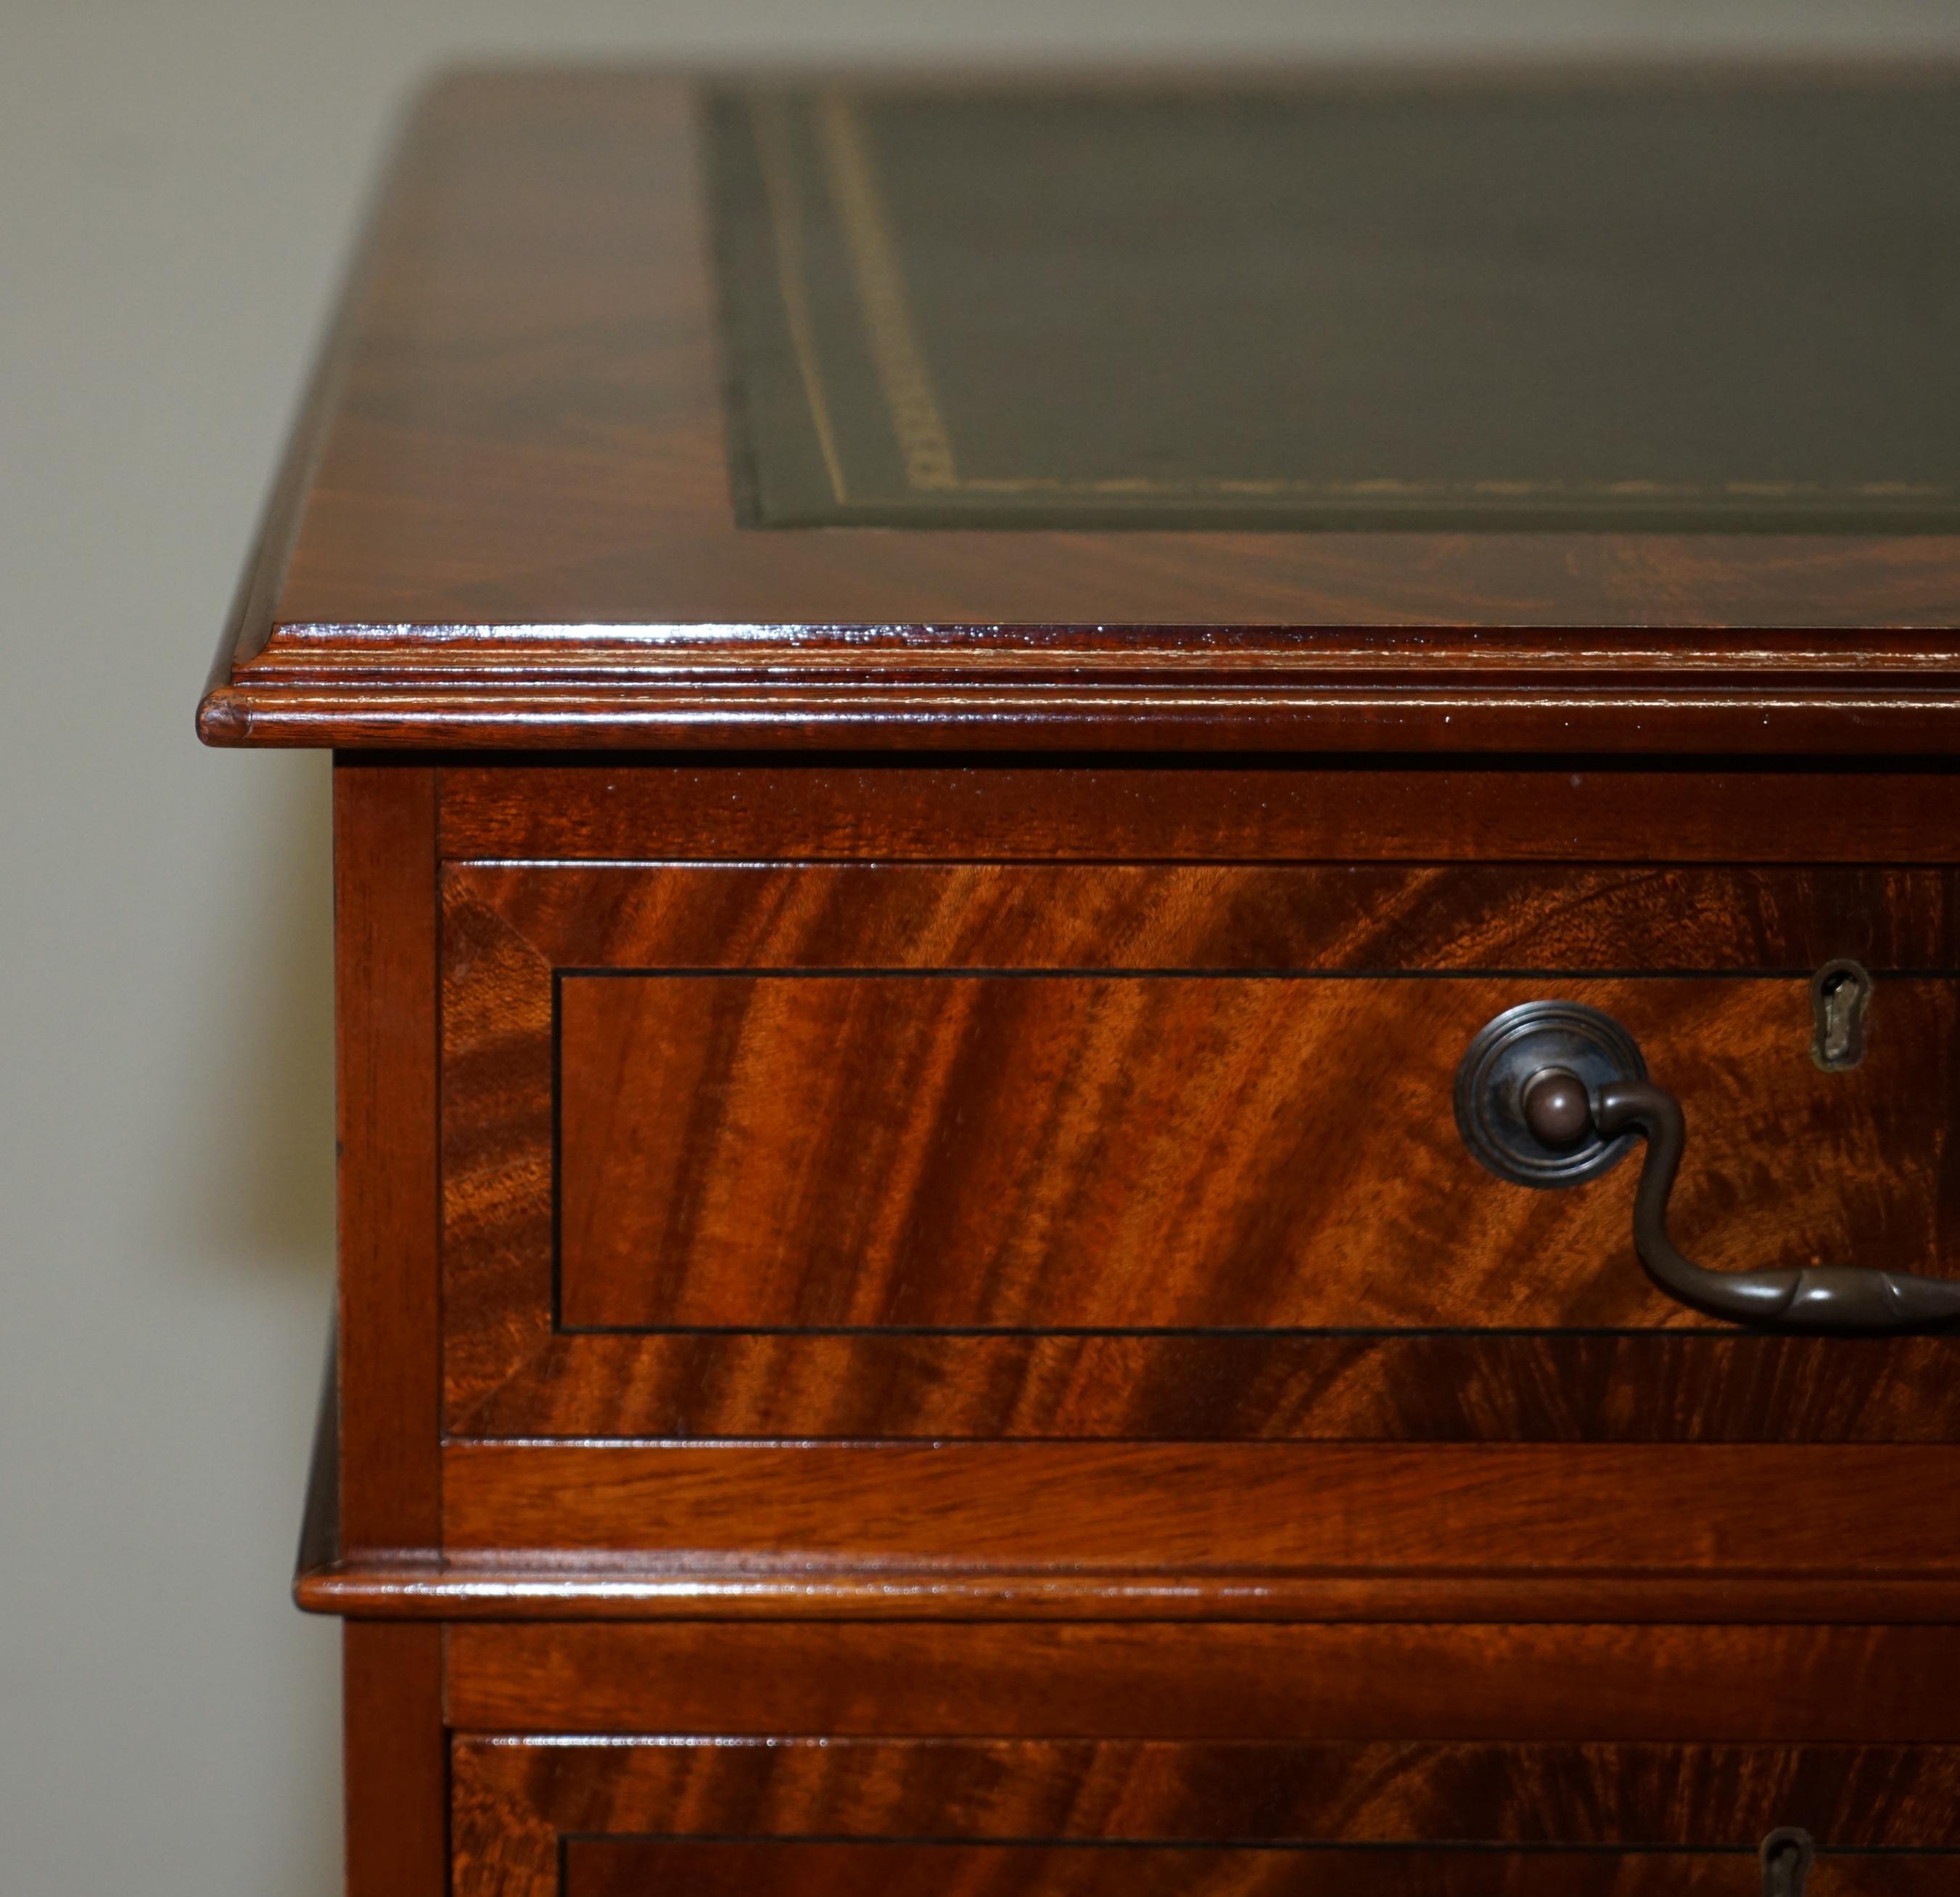 Early 20th Century ANTIQUE FLAMED HARDWOOD DESK FROM PRINCESS DIANA'S FAMiLY HOME SPENCER HOUSE For Sale